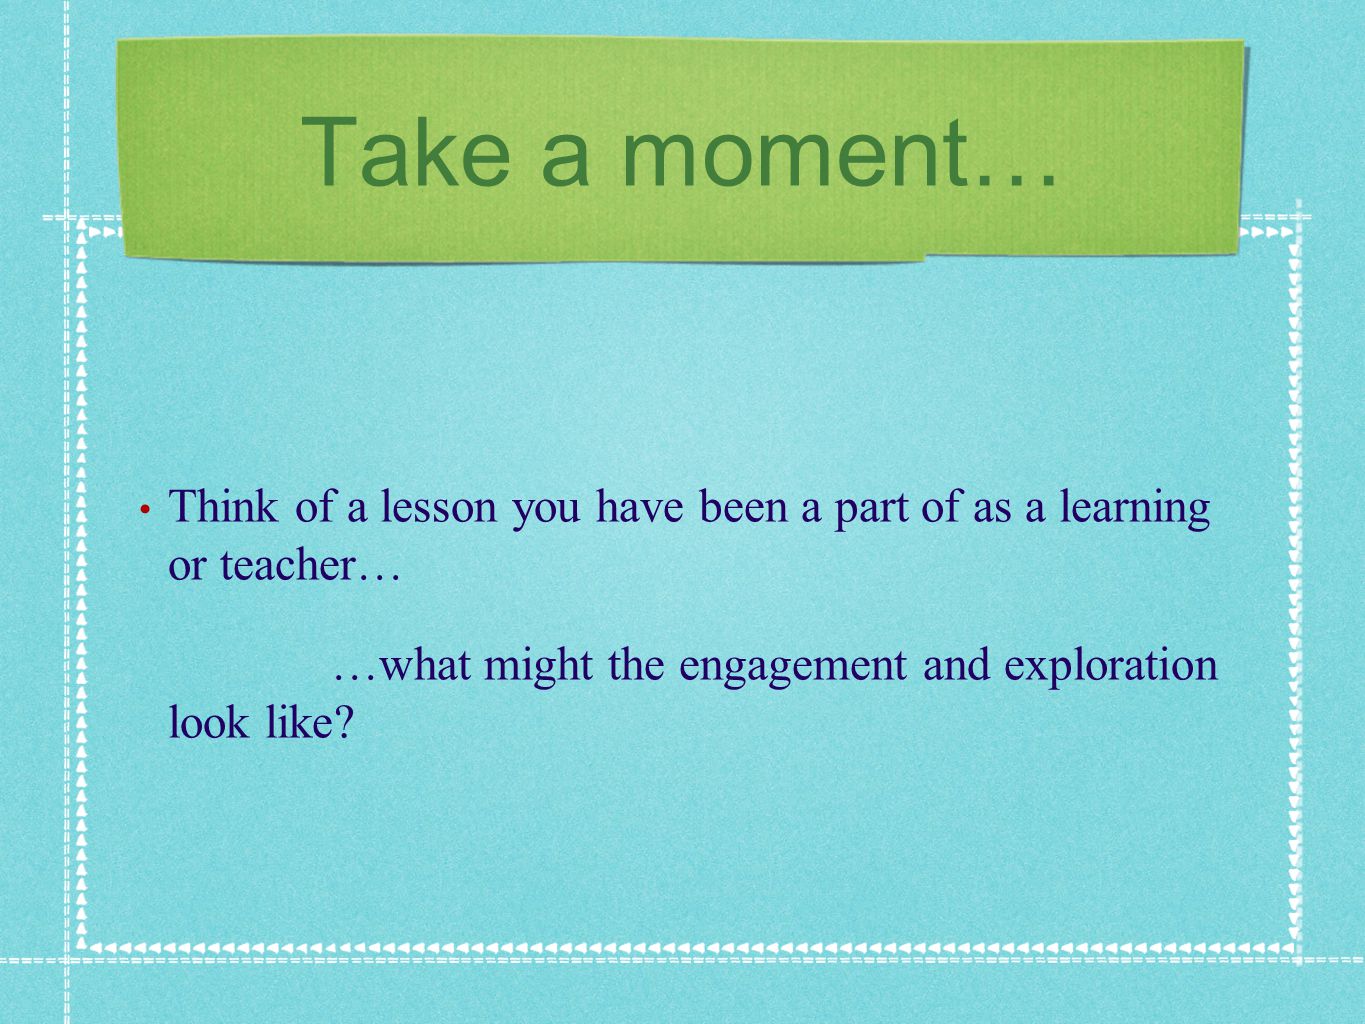 Take a moment… Think of a lesson you have been a part of as a learning or teacher… …what might the engagement and exploration look like